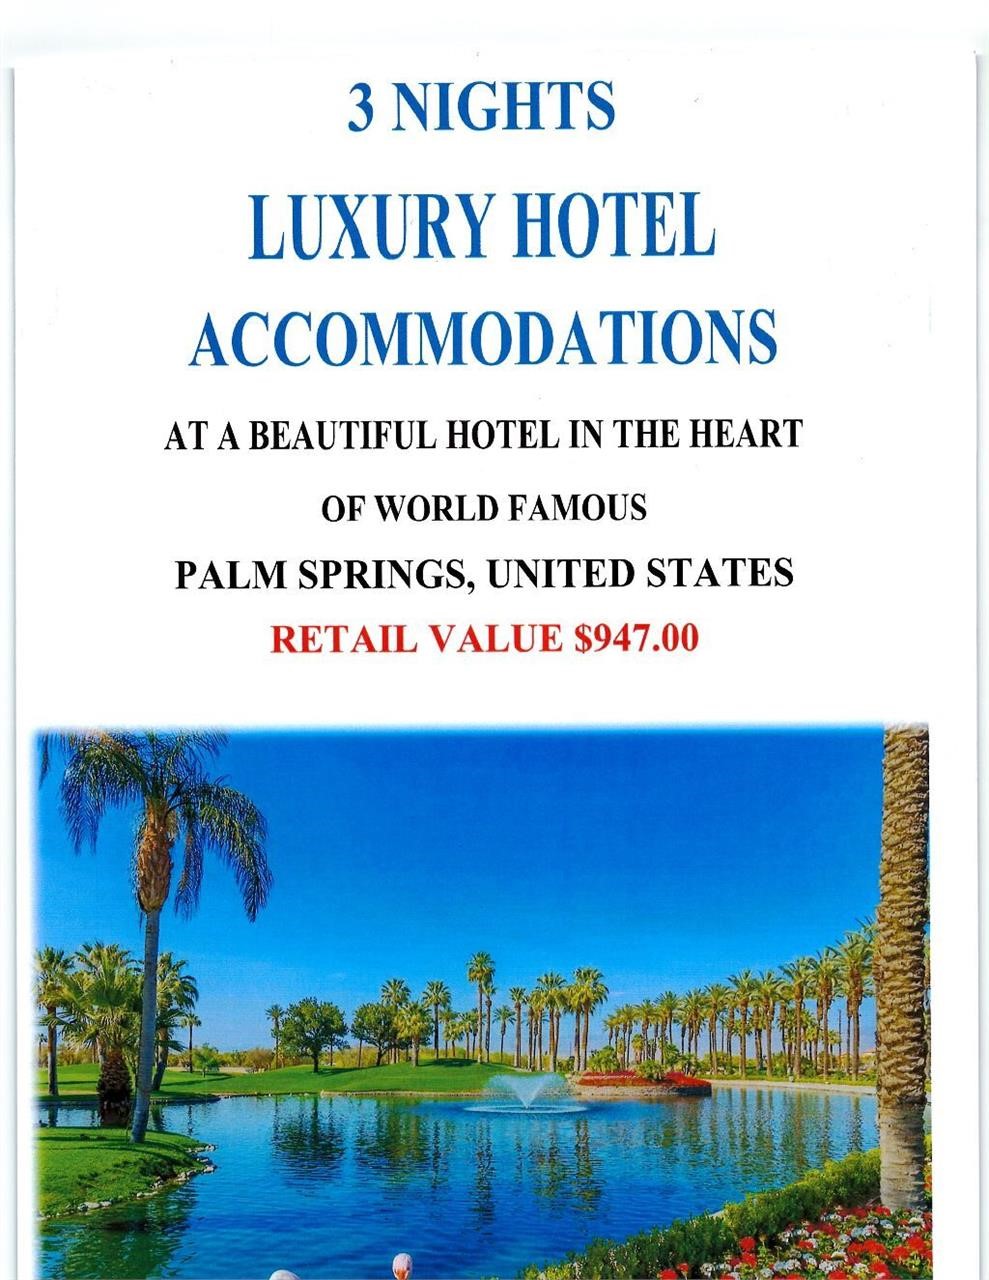 July 4TH. Vacation Hotel Accommodation Packages Auction